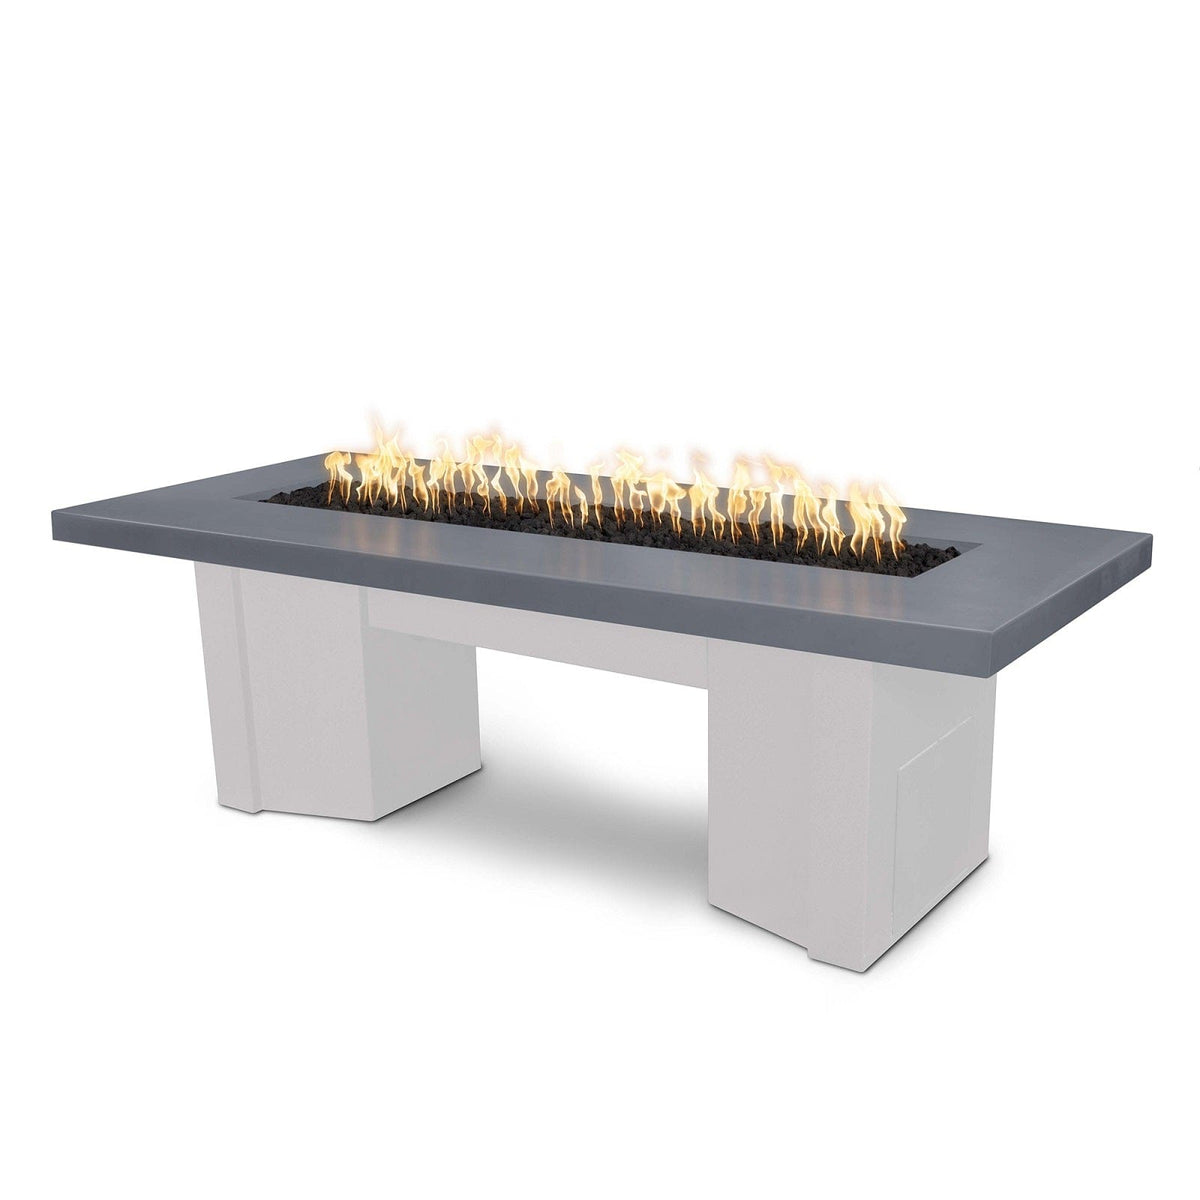 The Outdoor Plus Fire Features Gray (-GRY) / White Powder Coated Steel (-WHT) The Outdoor Plus 78&quot; Alameda Fire Table Smooth Concrete in Natural Gas - Flame Sense System with Push Button Spark Igniter / OPT-ALMGFRC78FSEN-NG